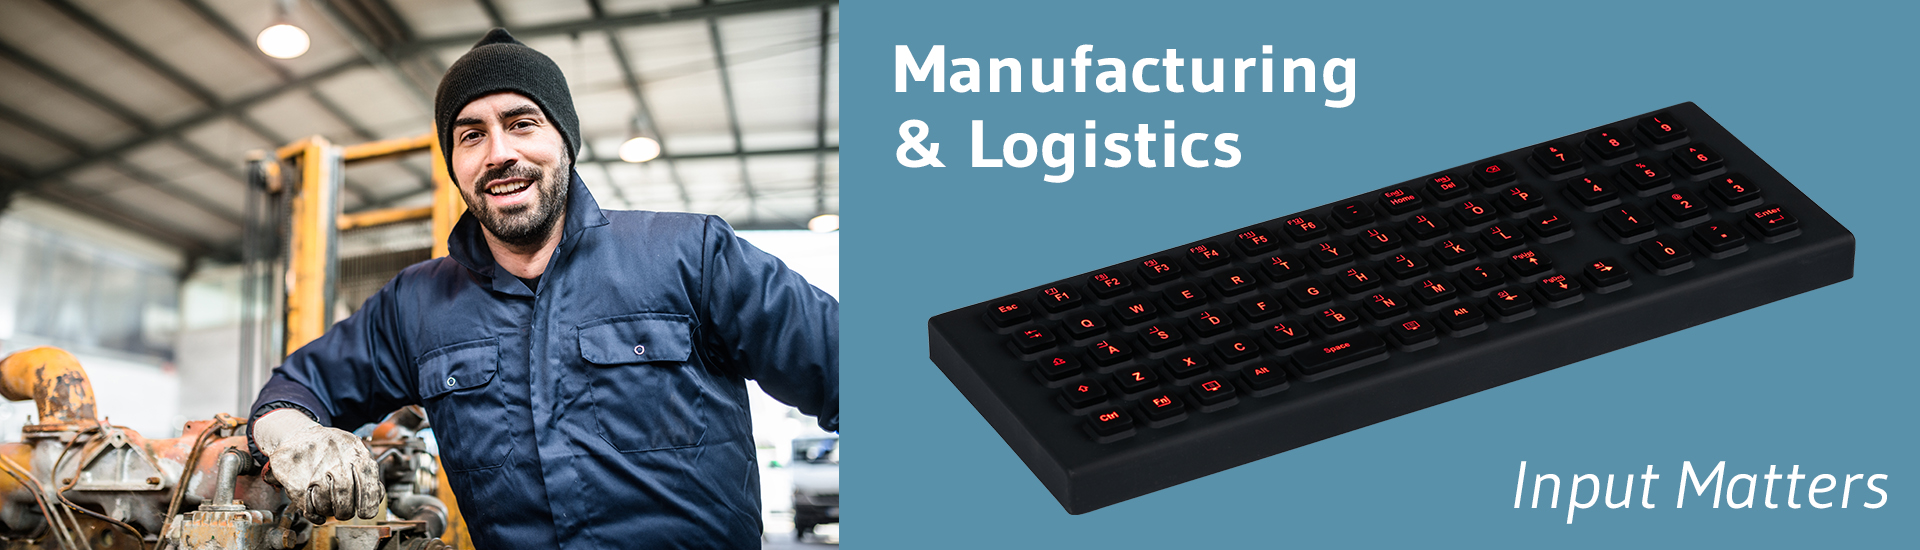 Data Input Solutions for Manufacturing and Logistics